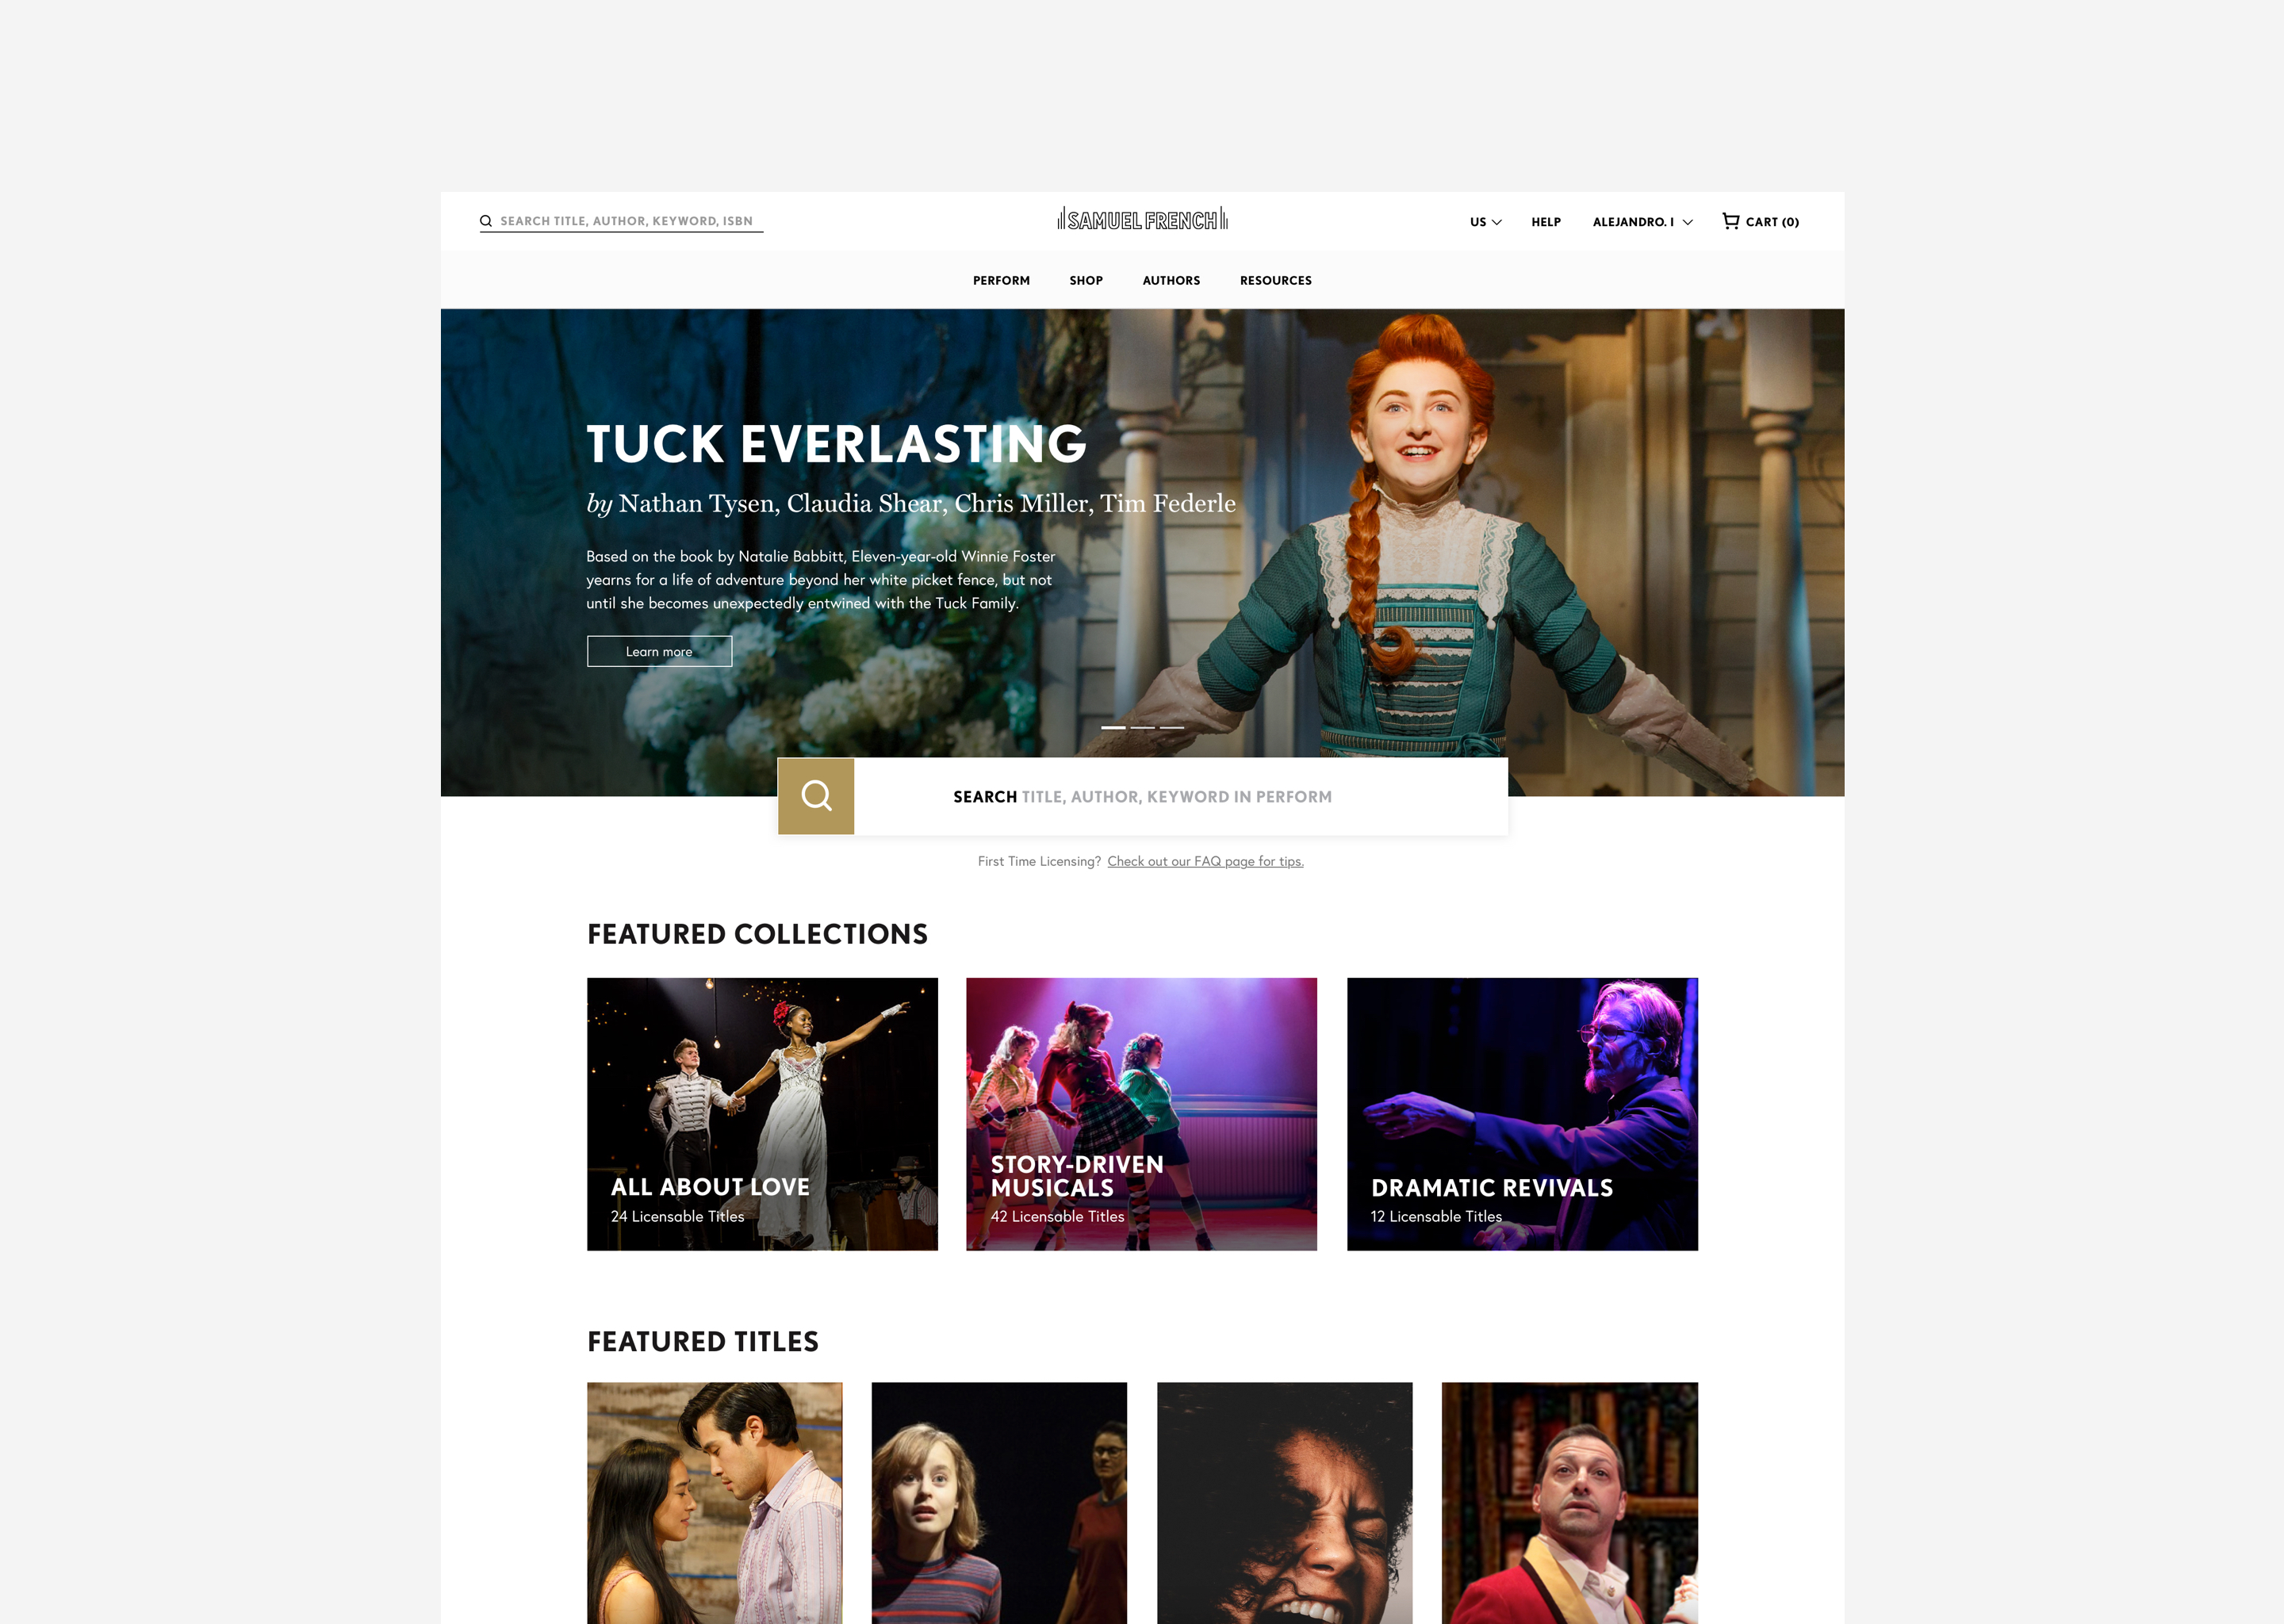 The Perform section of Samuel French website